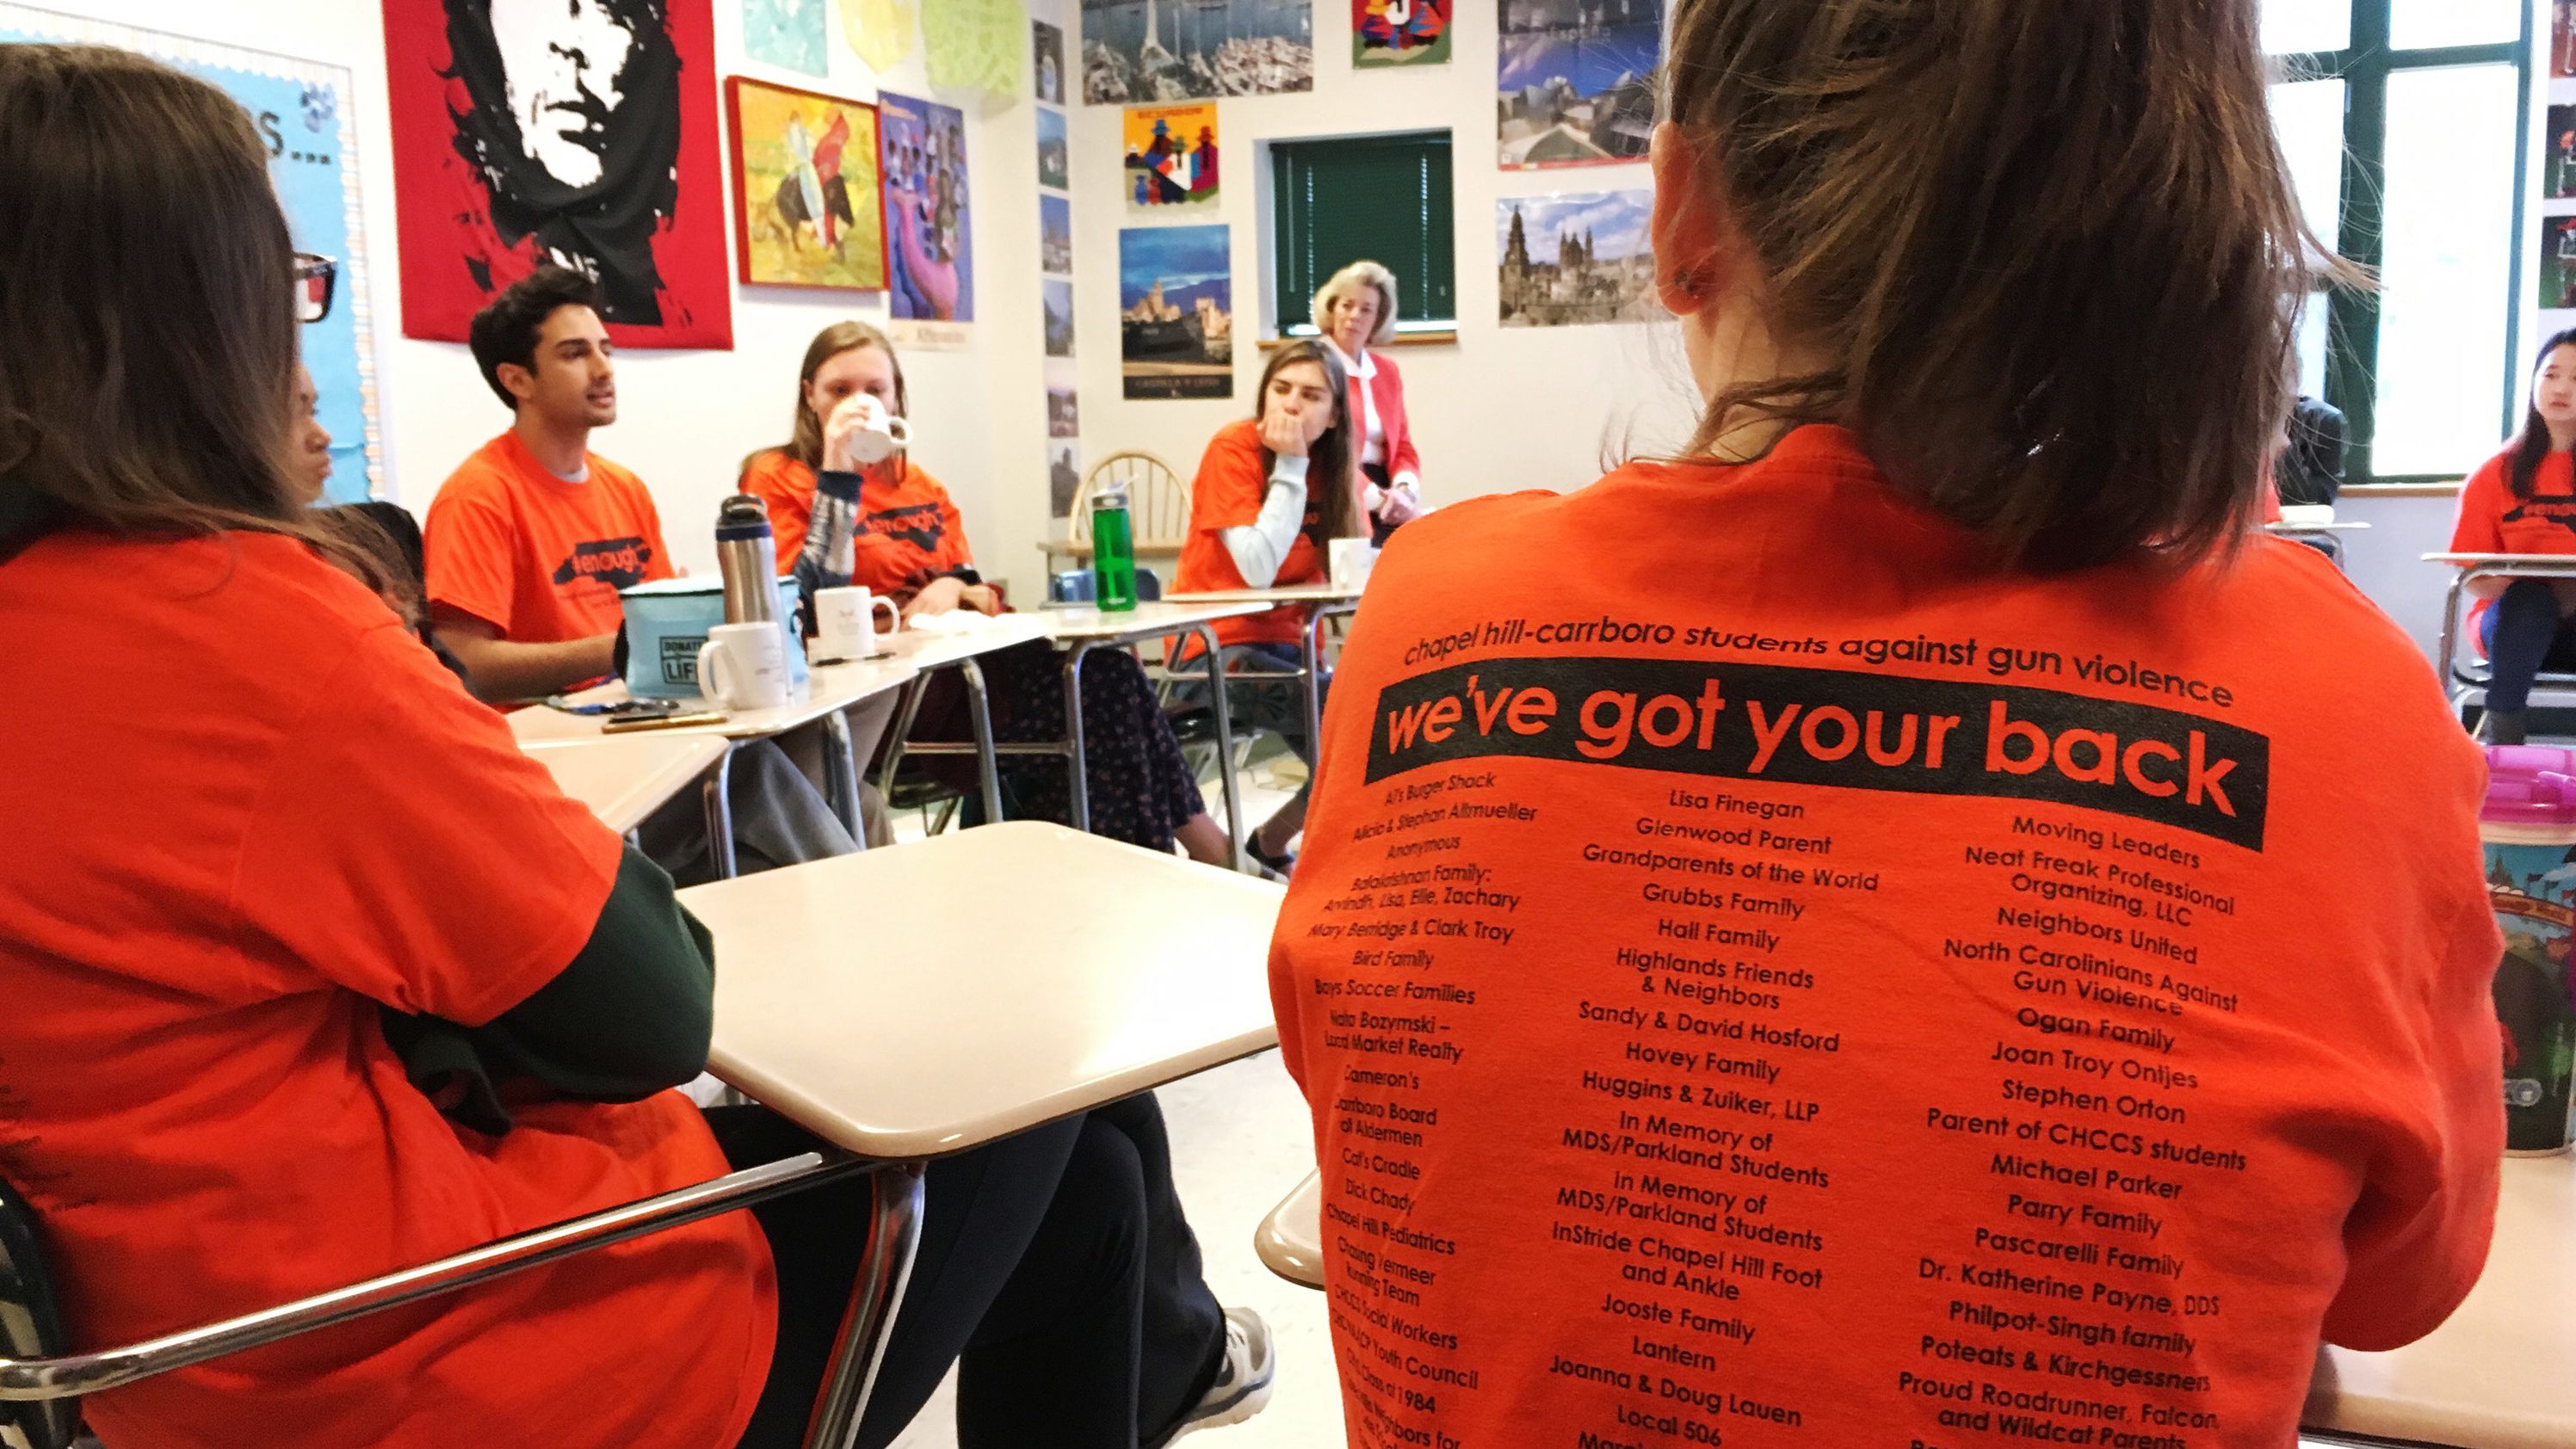 Students discuss gun violence ahead of a walkout at East Chapel Hill High School on Wednesday, March 14, 2018, in Chapel Hill, N.C. 